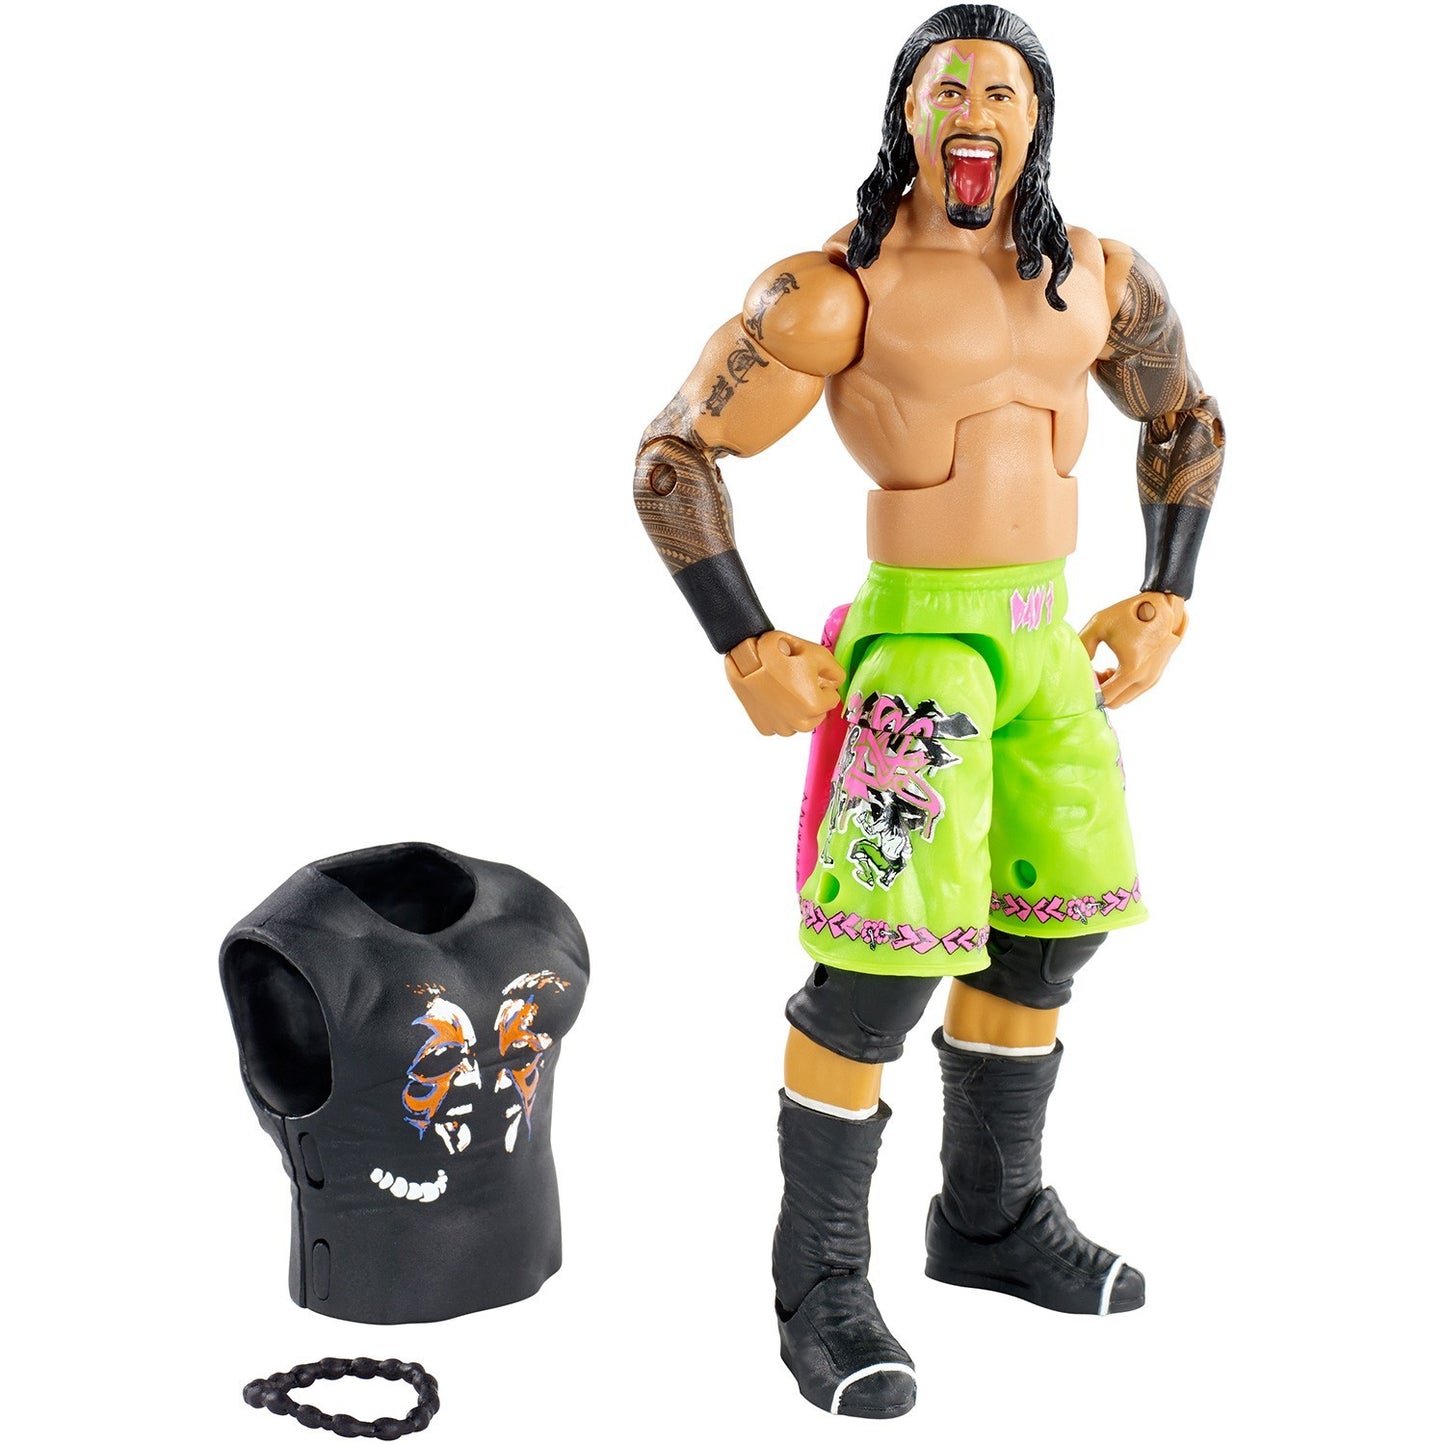 Jimmy Uso WWE Elite Collection Series #31 Action Figure